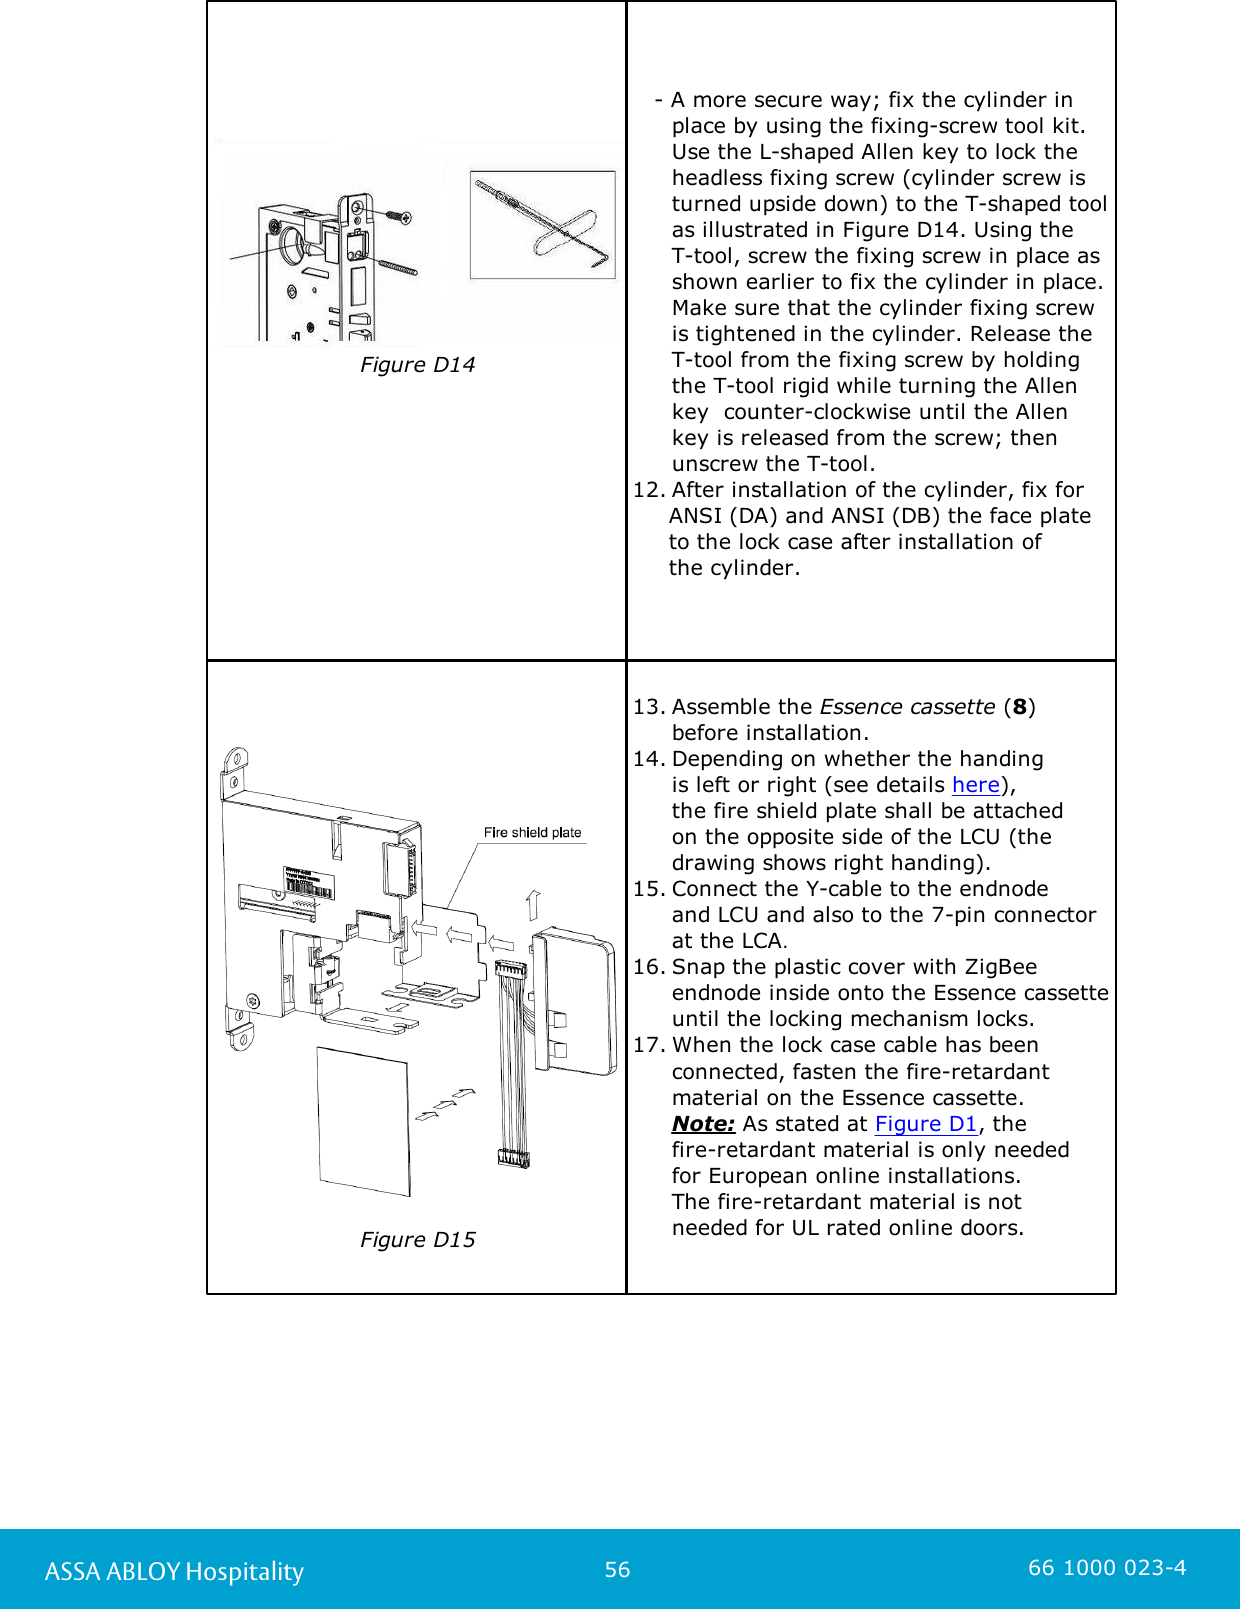 56ASSA ABLOY Hospitality 66 1000 023-4Figure D14                      - A more secure way; fix the cylinder in place by using the fixing-screw tool kit. Use the L-shaped Allen key to lock theheadless fixing screw (cylinder screw isturned upside down) to the T-shaped toolas illustrated in Figure D14. Using the T-tool, screw the fixing screw in place asshown earlier to fix the cylinder in place.Make sure that the cylinder fixing screwis tightened in the cylinder. Release theT-tool from the fixing screw by holdingthe T-tool rigid while turning the Allenkey  counter-clockwise until the Allenkey is released from the screw; thenunscrew the T-tool. 12. After installation of the cylinder, fix for      ANSI (DA) and ANSI (DB) the face plate     to the lock case after installation of      the cylinder. Figure D1513. Assemble the Essence cassette (8) before installation.14. Depending on whether the handing is left or right (see details here), the fire shield plate shall be attached on the opposite side of the LCU (the drawing shows right handing).15. Connect the Y-cable to the endnode and LCU and also to the 7-pin connector at the LCA. 16. Snap the plastic cover with ZigBeeendnode inside onto the Essence cassetteuntil the locking mechanism locks.17. When the lock case cable has beenconnected, fasten the fire-retardantmaterial on the Essence cassette. Note: As stated at Figure D1, the fire-retardant material is only needed for European online installations. The fire-retardant material is not needed for UL rated online doors. 